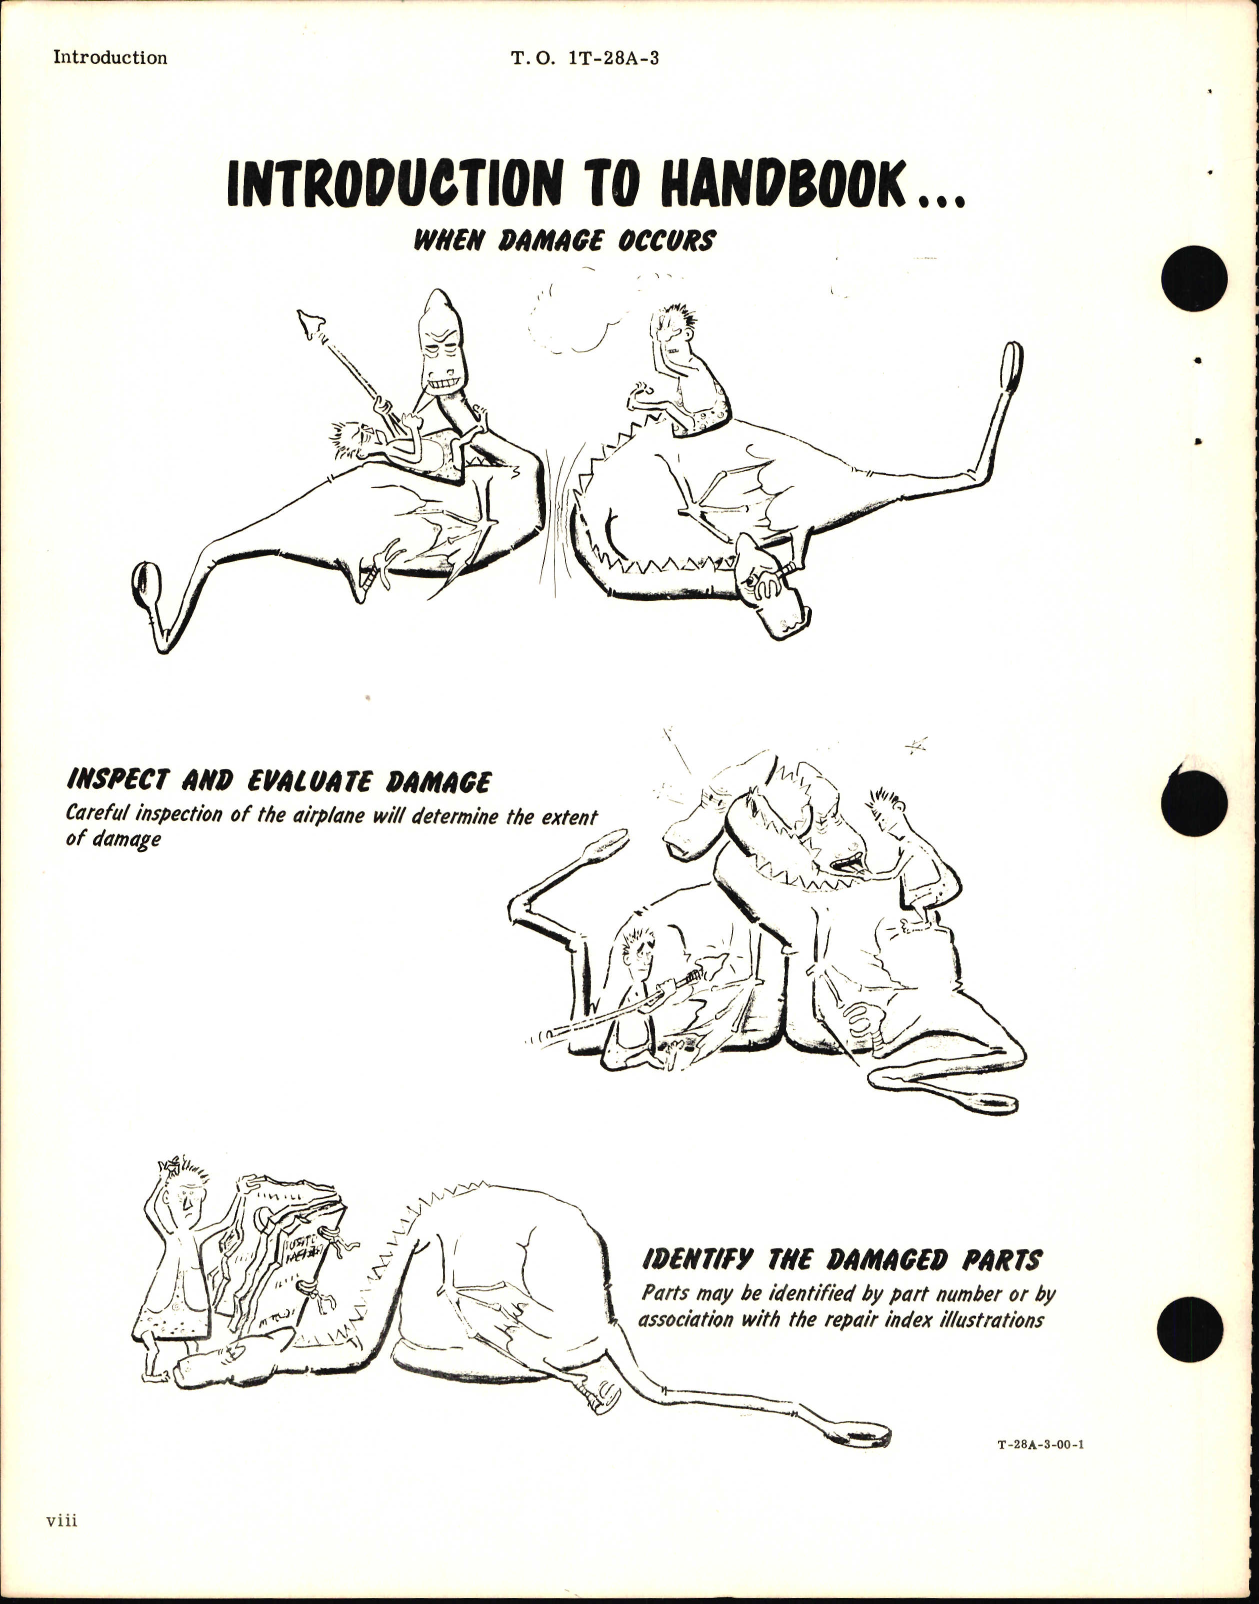 Sample page 8 from AirCorps Library document: Structural Repair Manual for T-28A